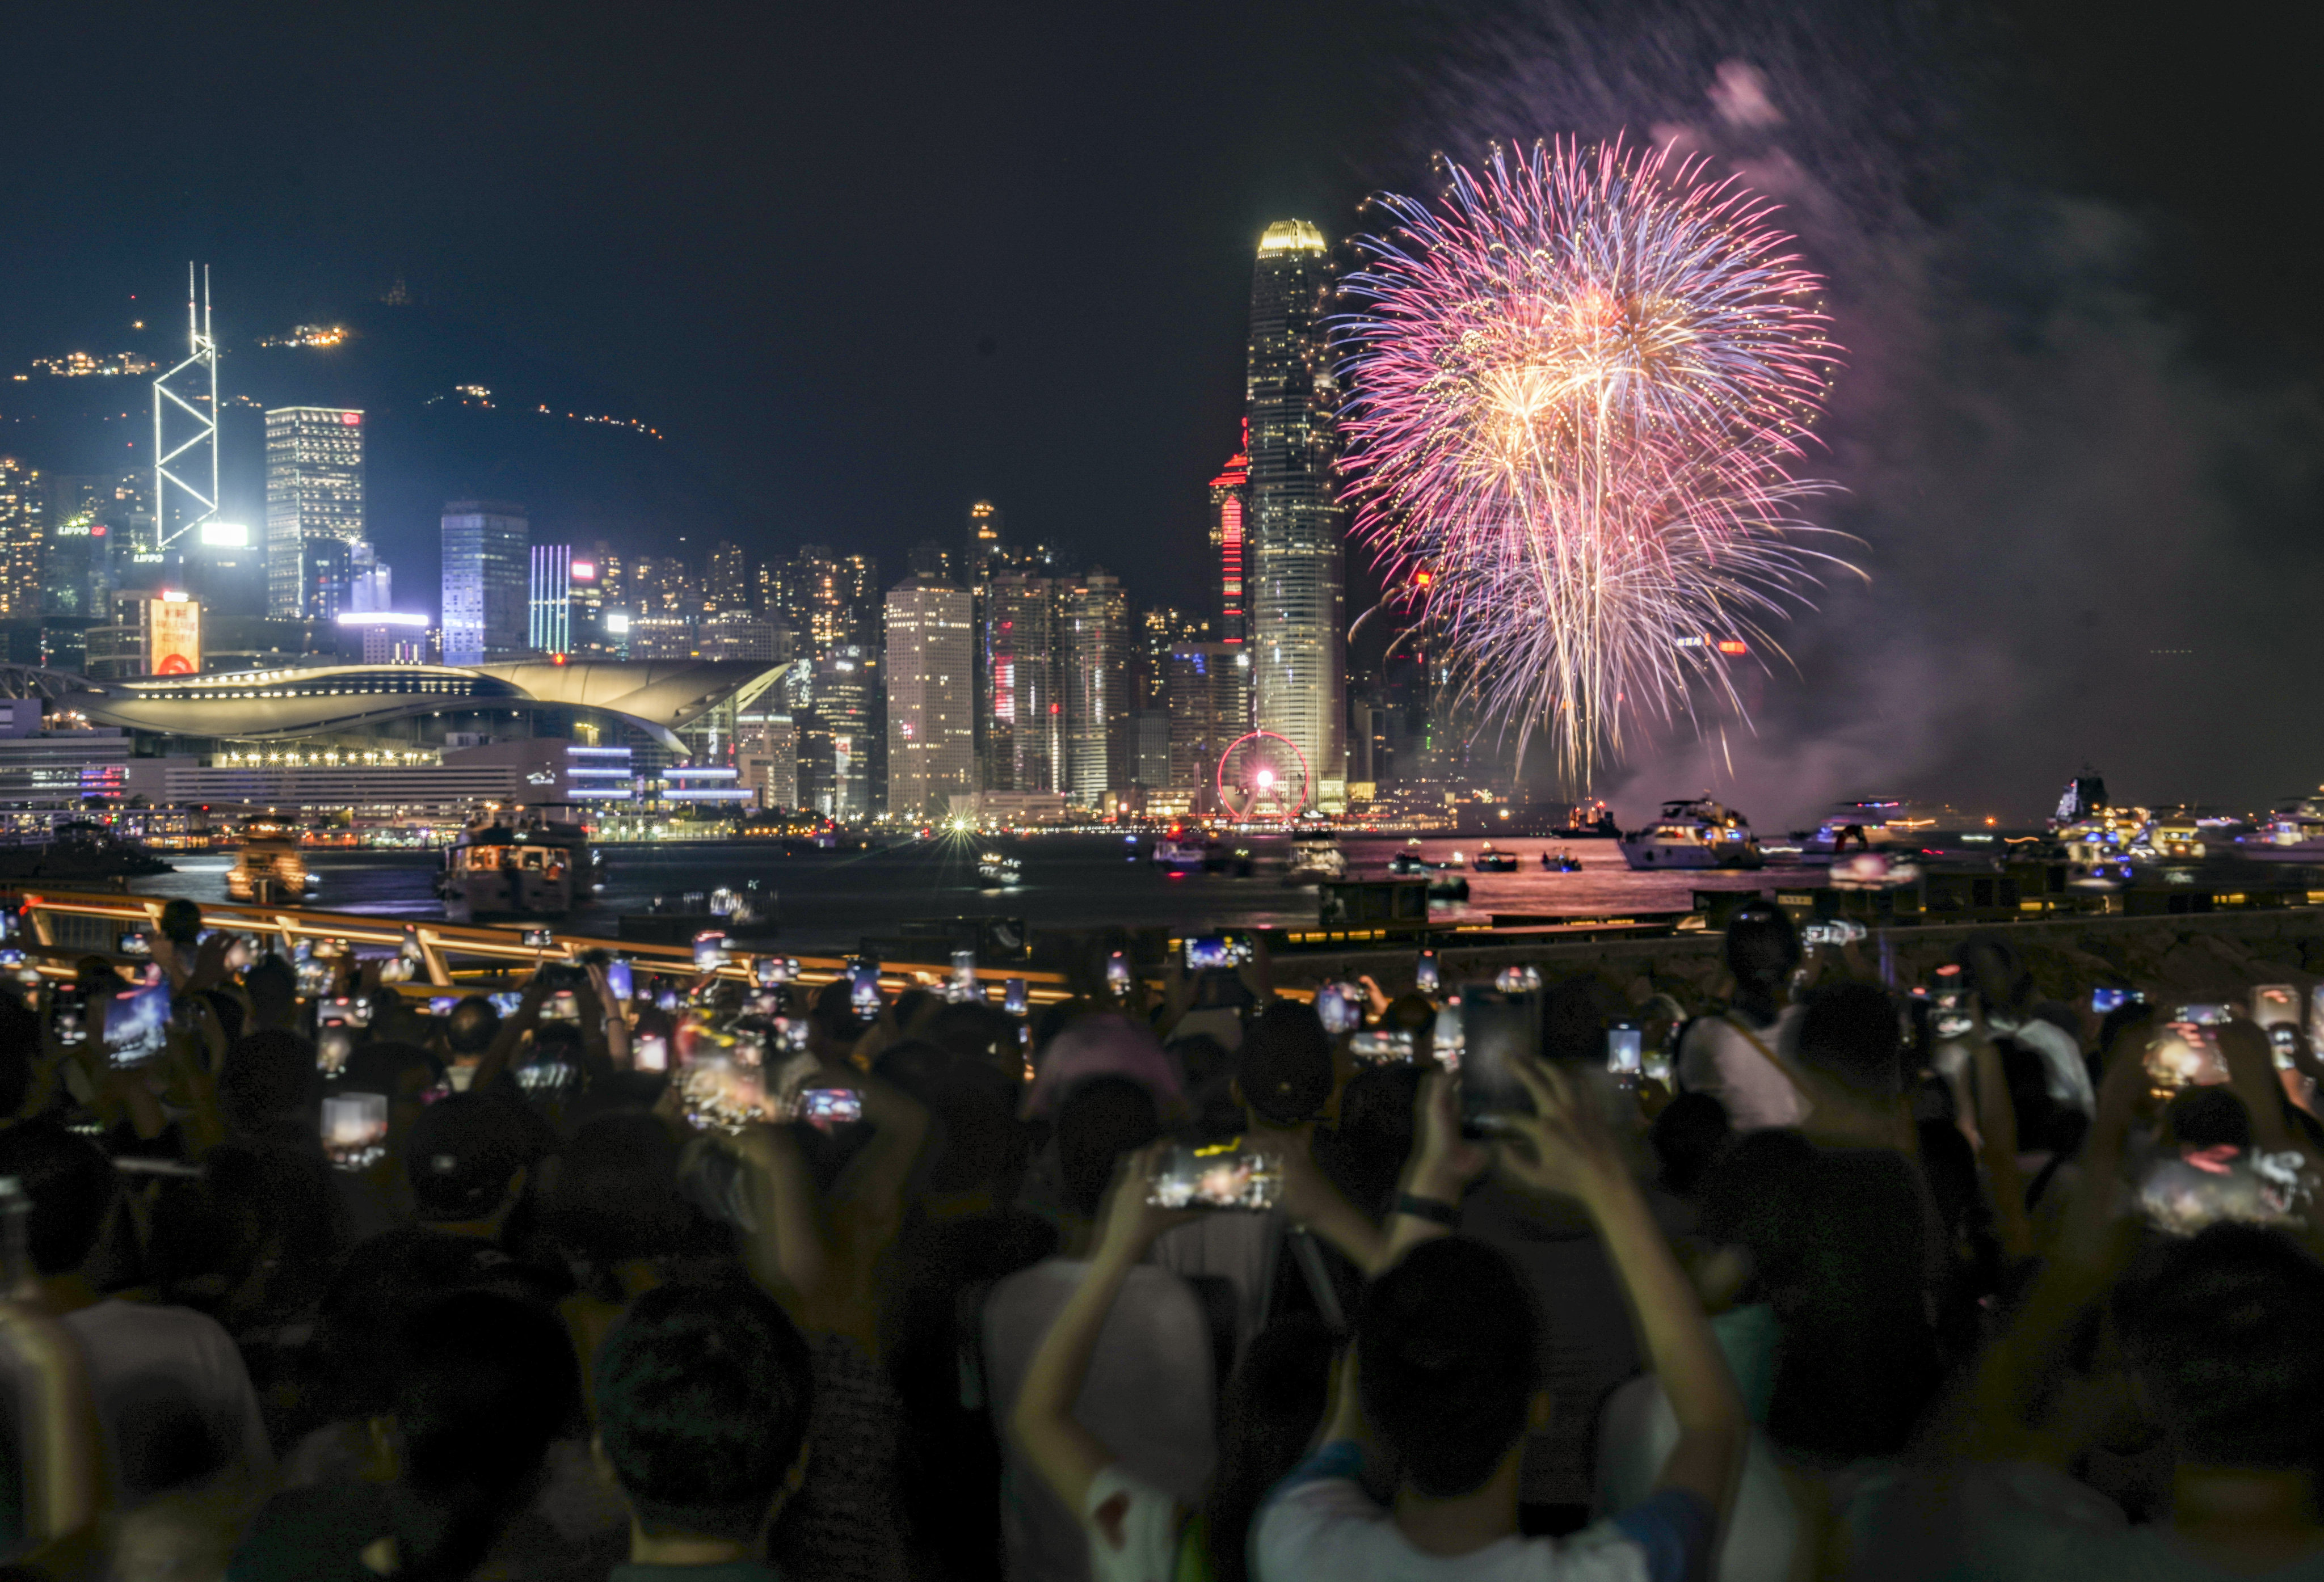 People gather in Hong Kong’s North Point district for the National Day fireworks display on October 1. Photo: Sam Tsang